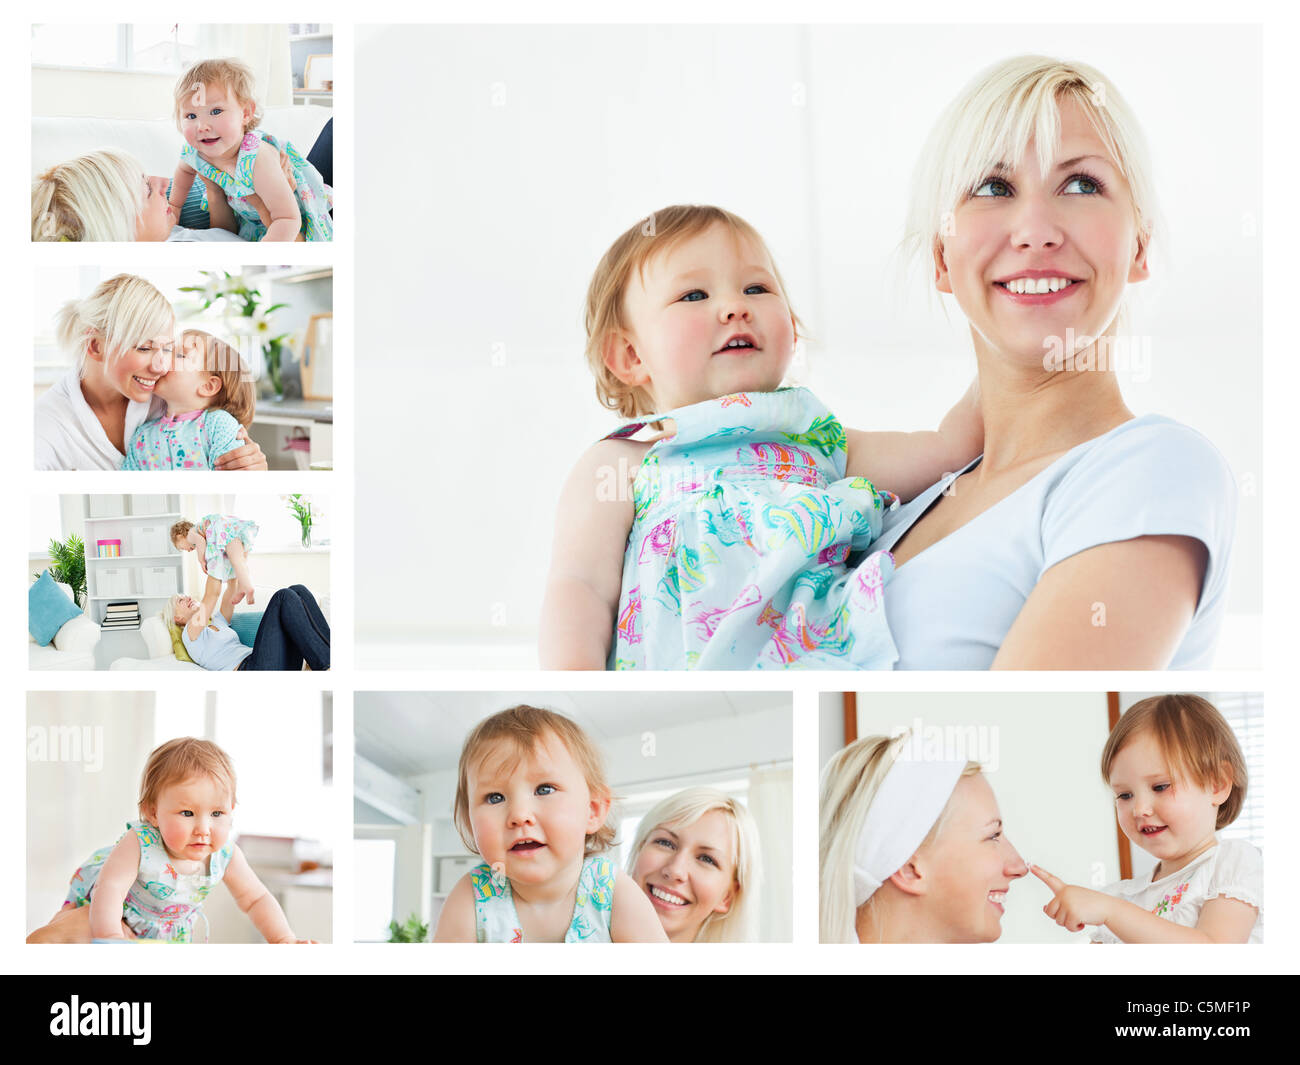 Collage of a blonde woman holding a baby in the living room Stock Photo